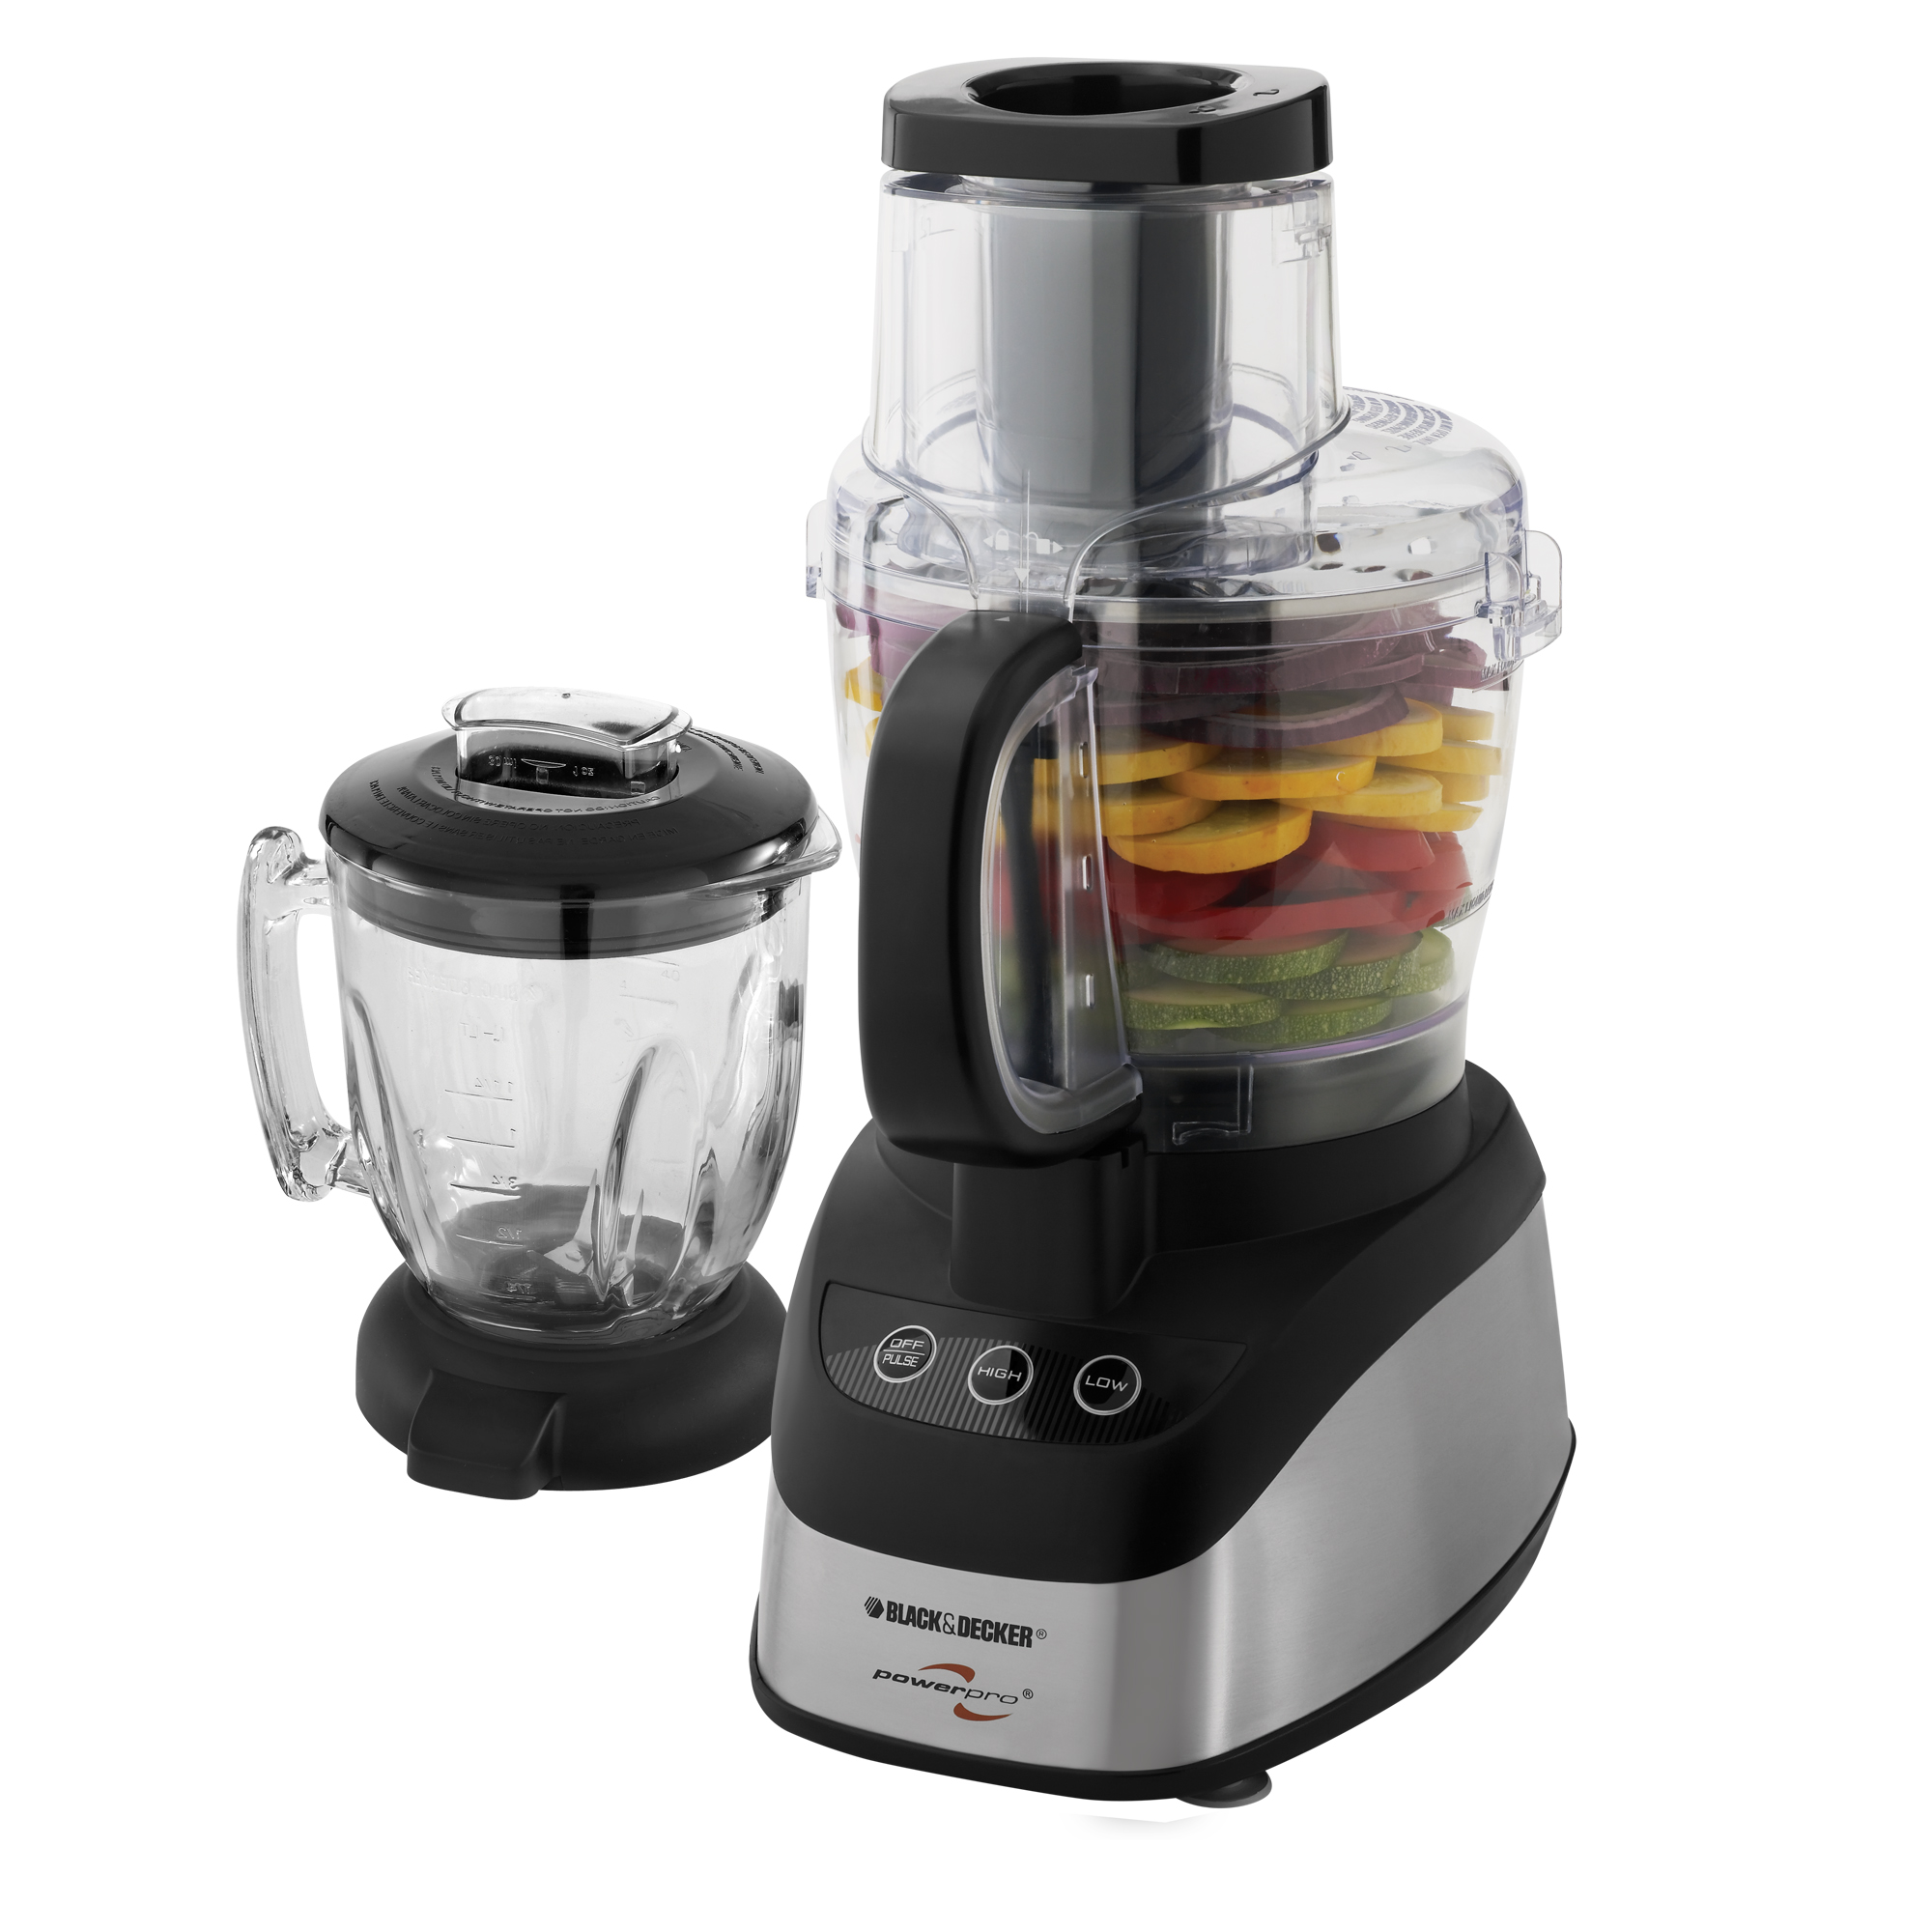 Buy the PowerPro Wide-Mouth 10 Cup Food Processor, FP2500B